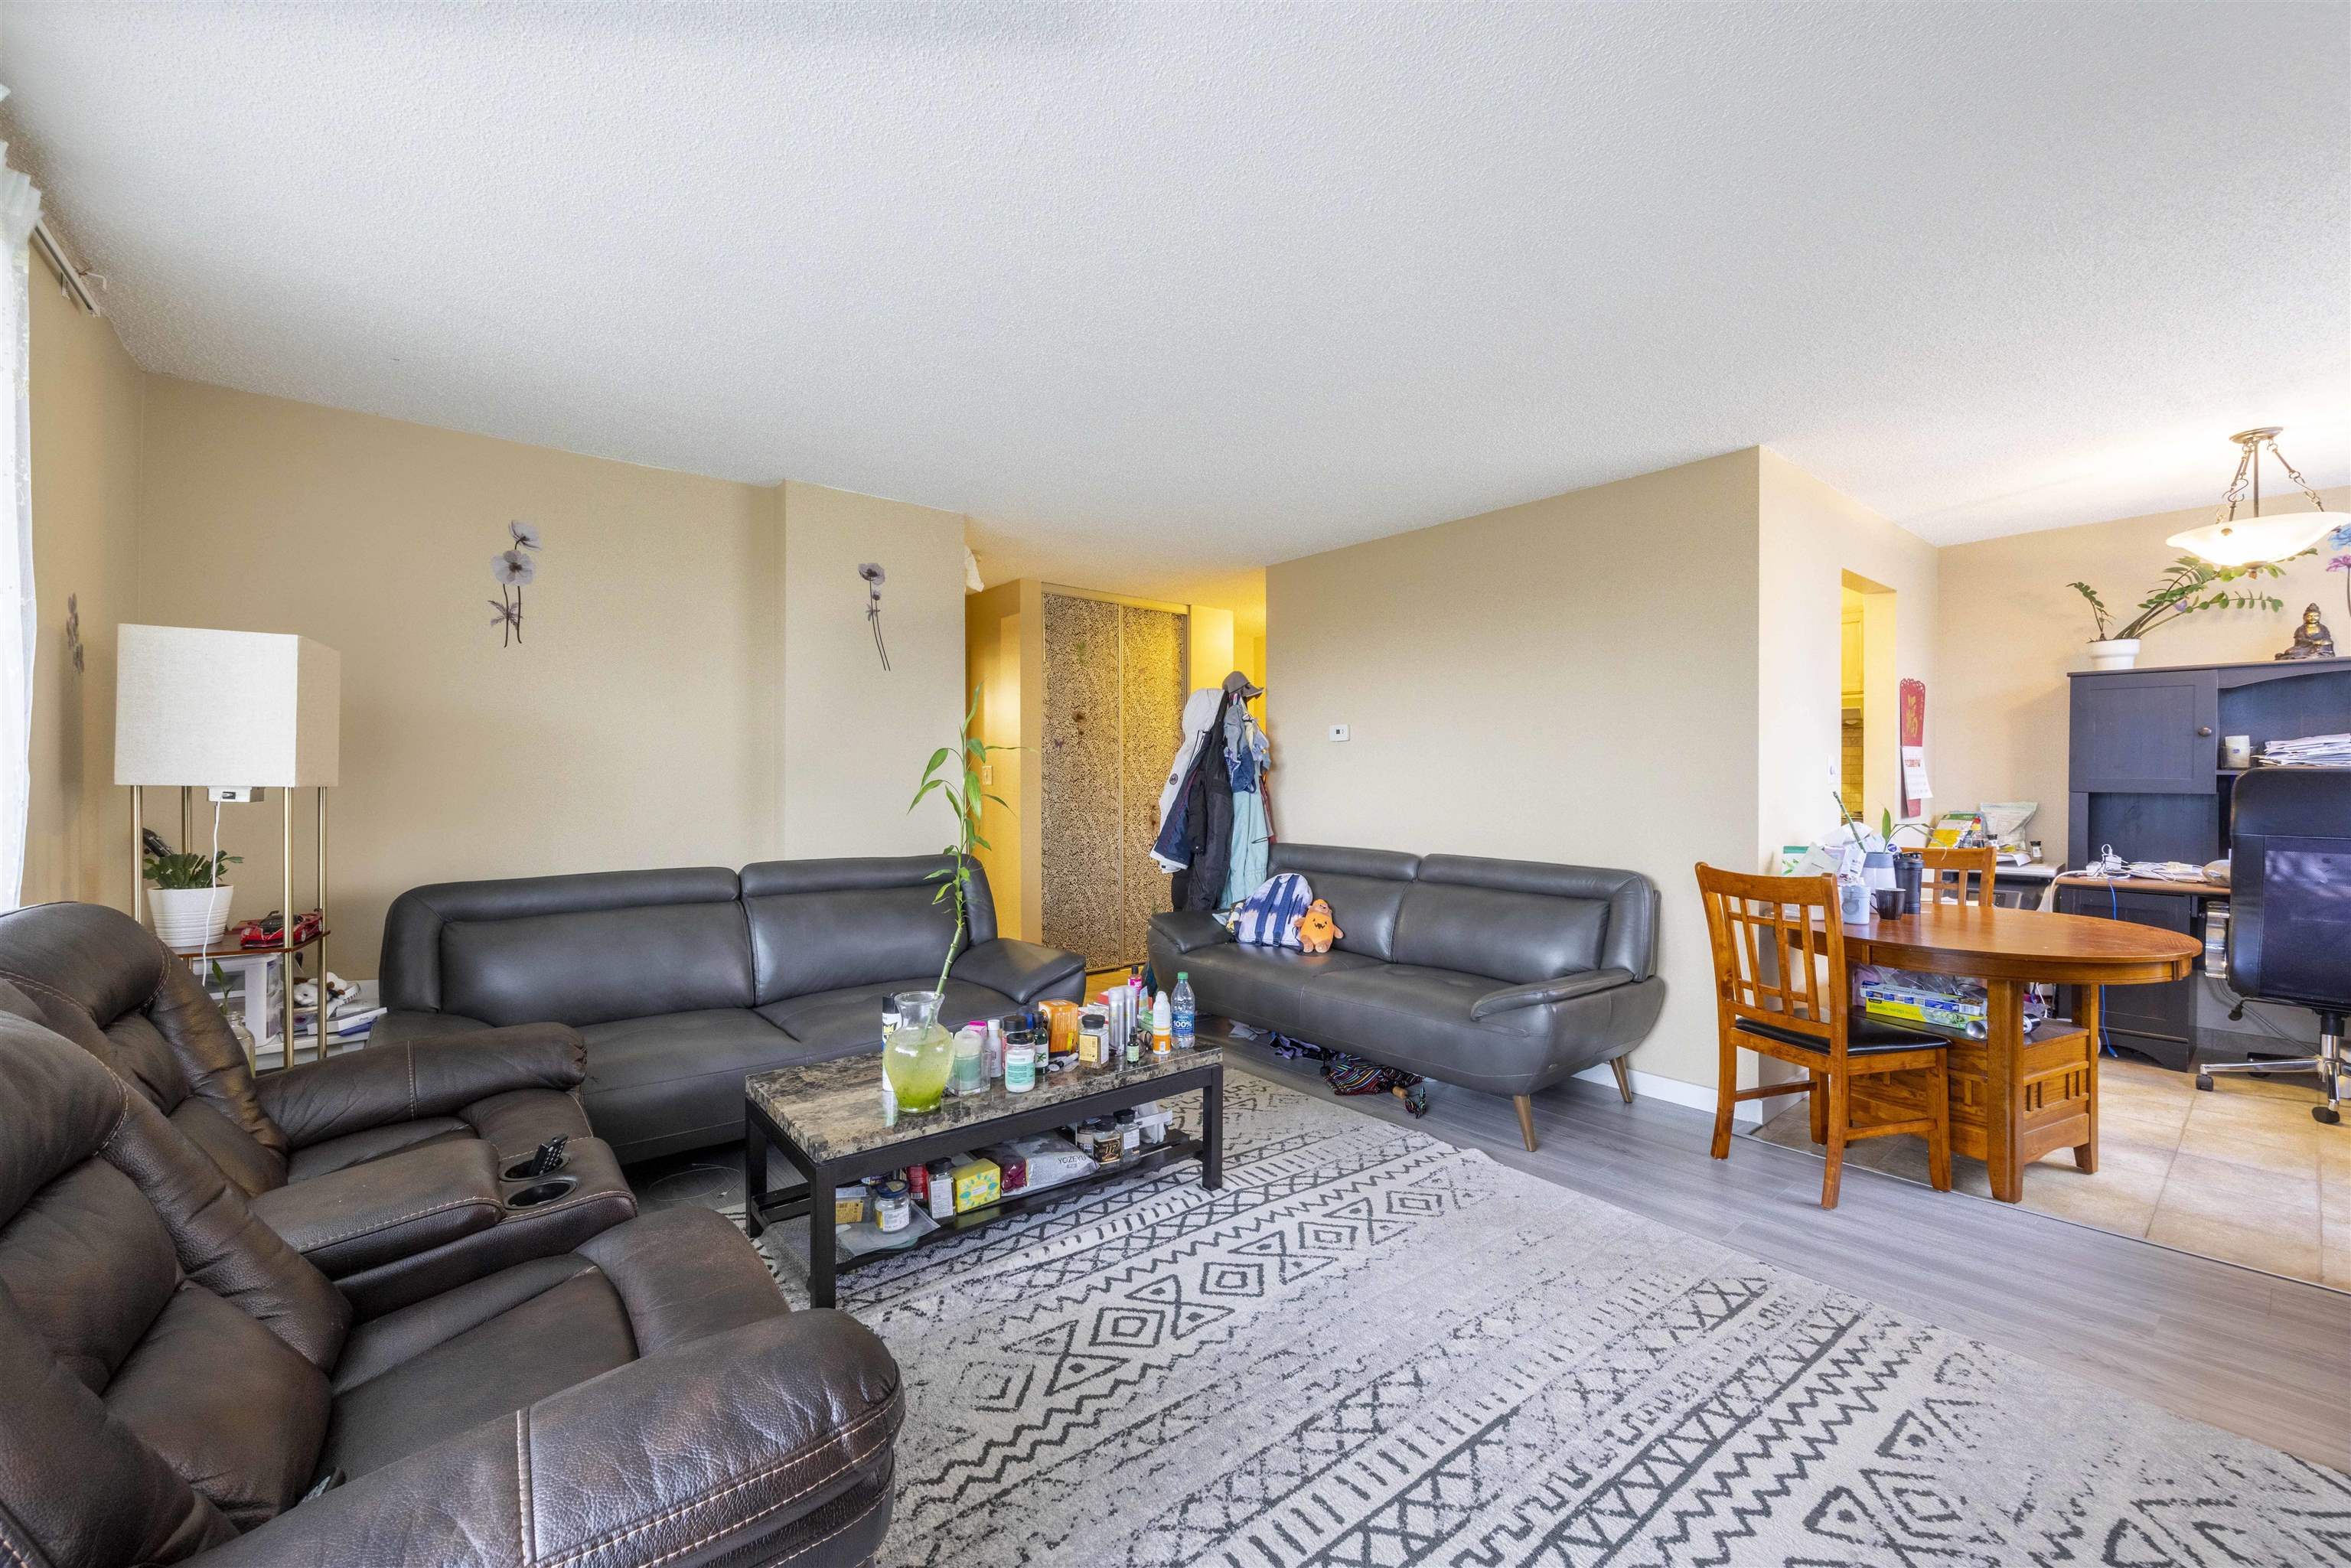 Listing image of 302 701 W VICTORIA PARK